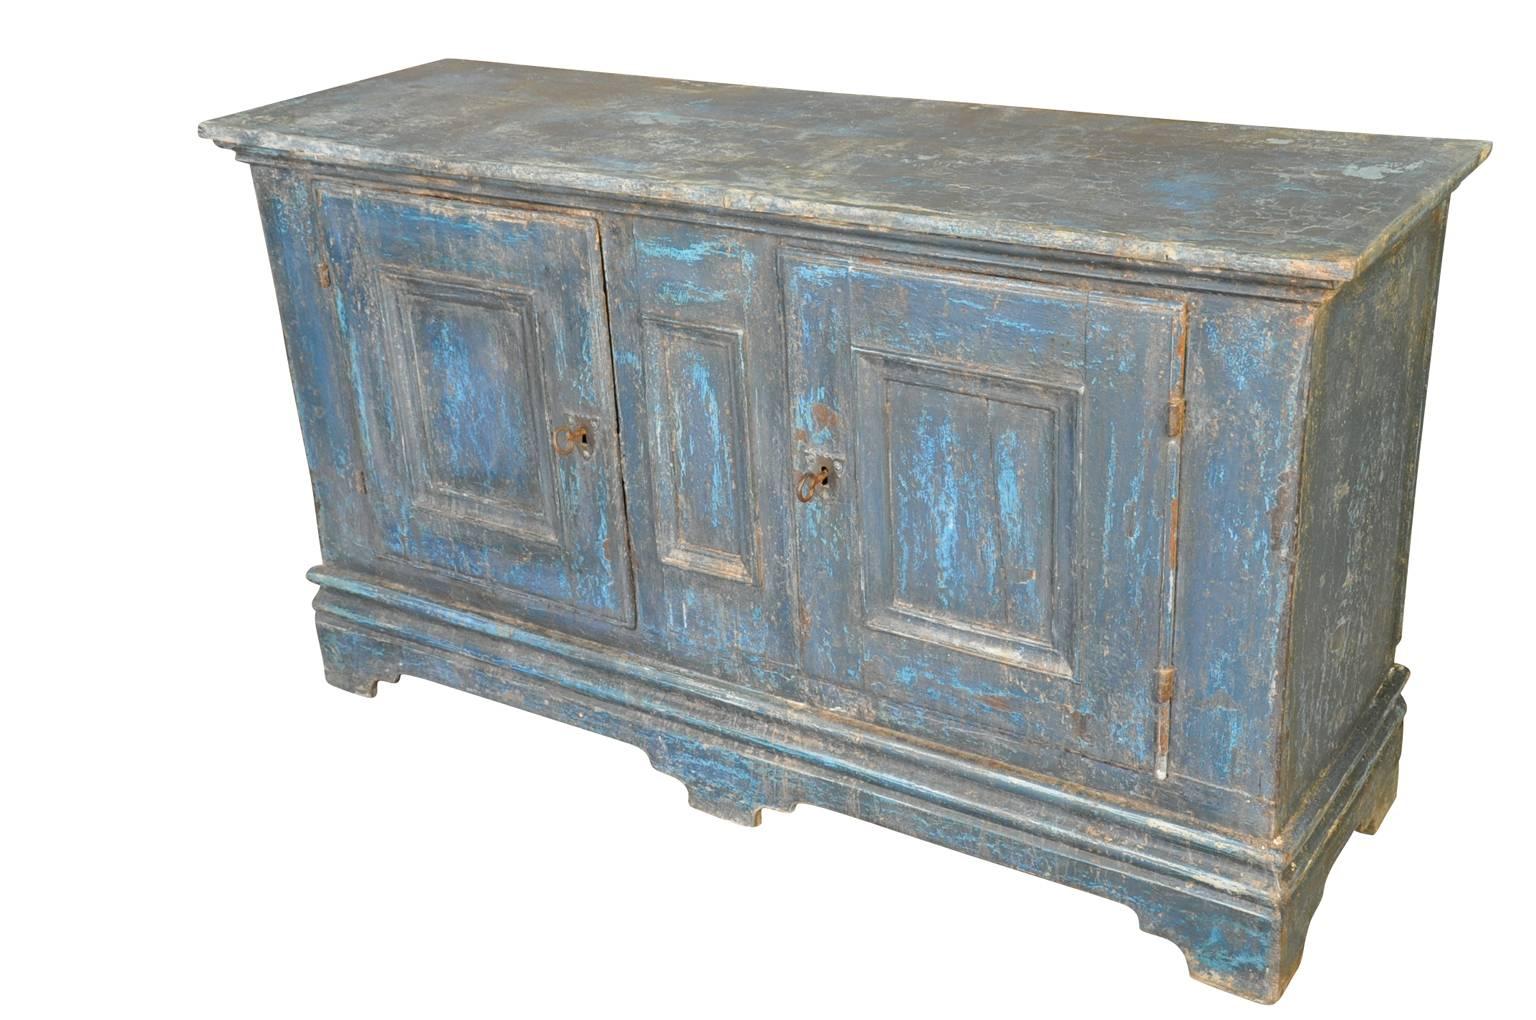 A wonderful pair of French 18th century buffets cabinets - enfilades in painted wood.  Terrific painted finish in hues from azure to turquoise.  Wonderful storage pieces that will add charm and character to any room.  The cabinets may be sold as a